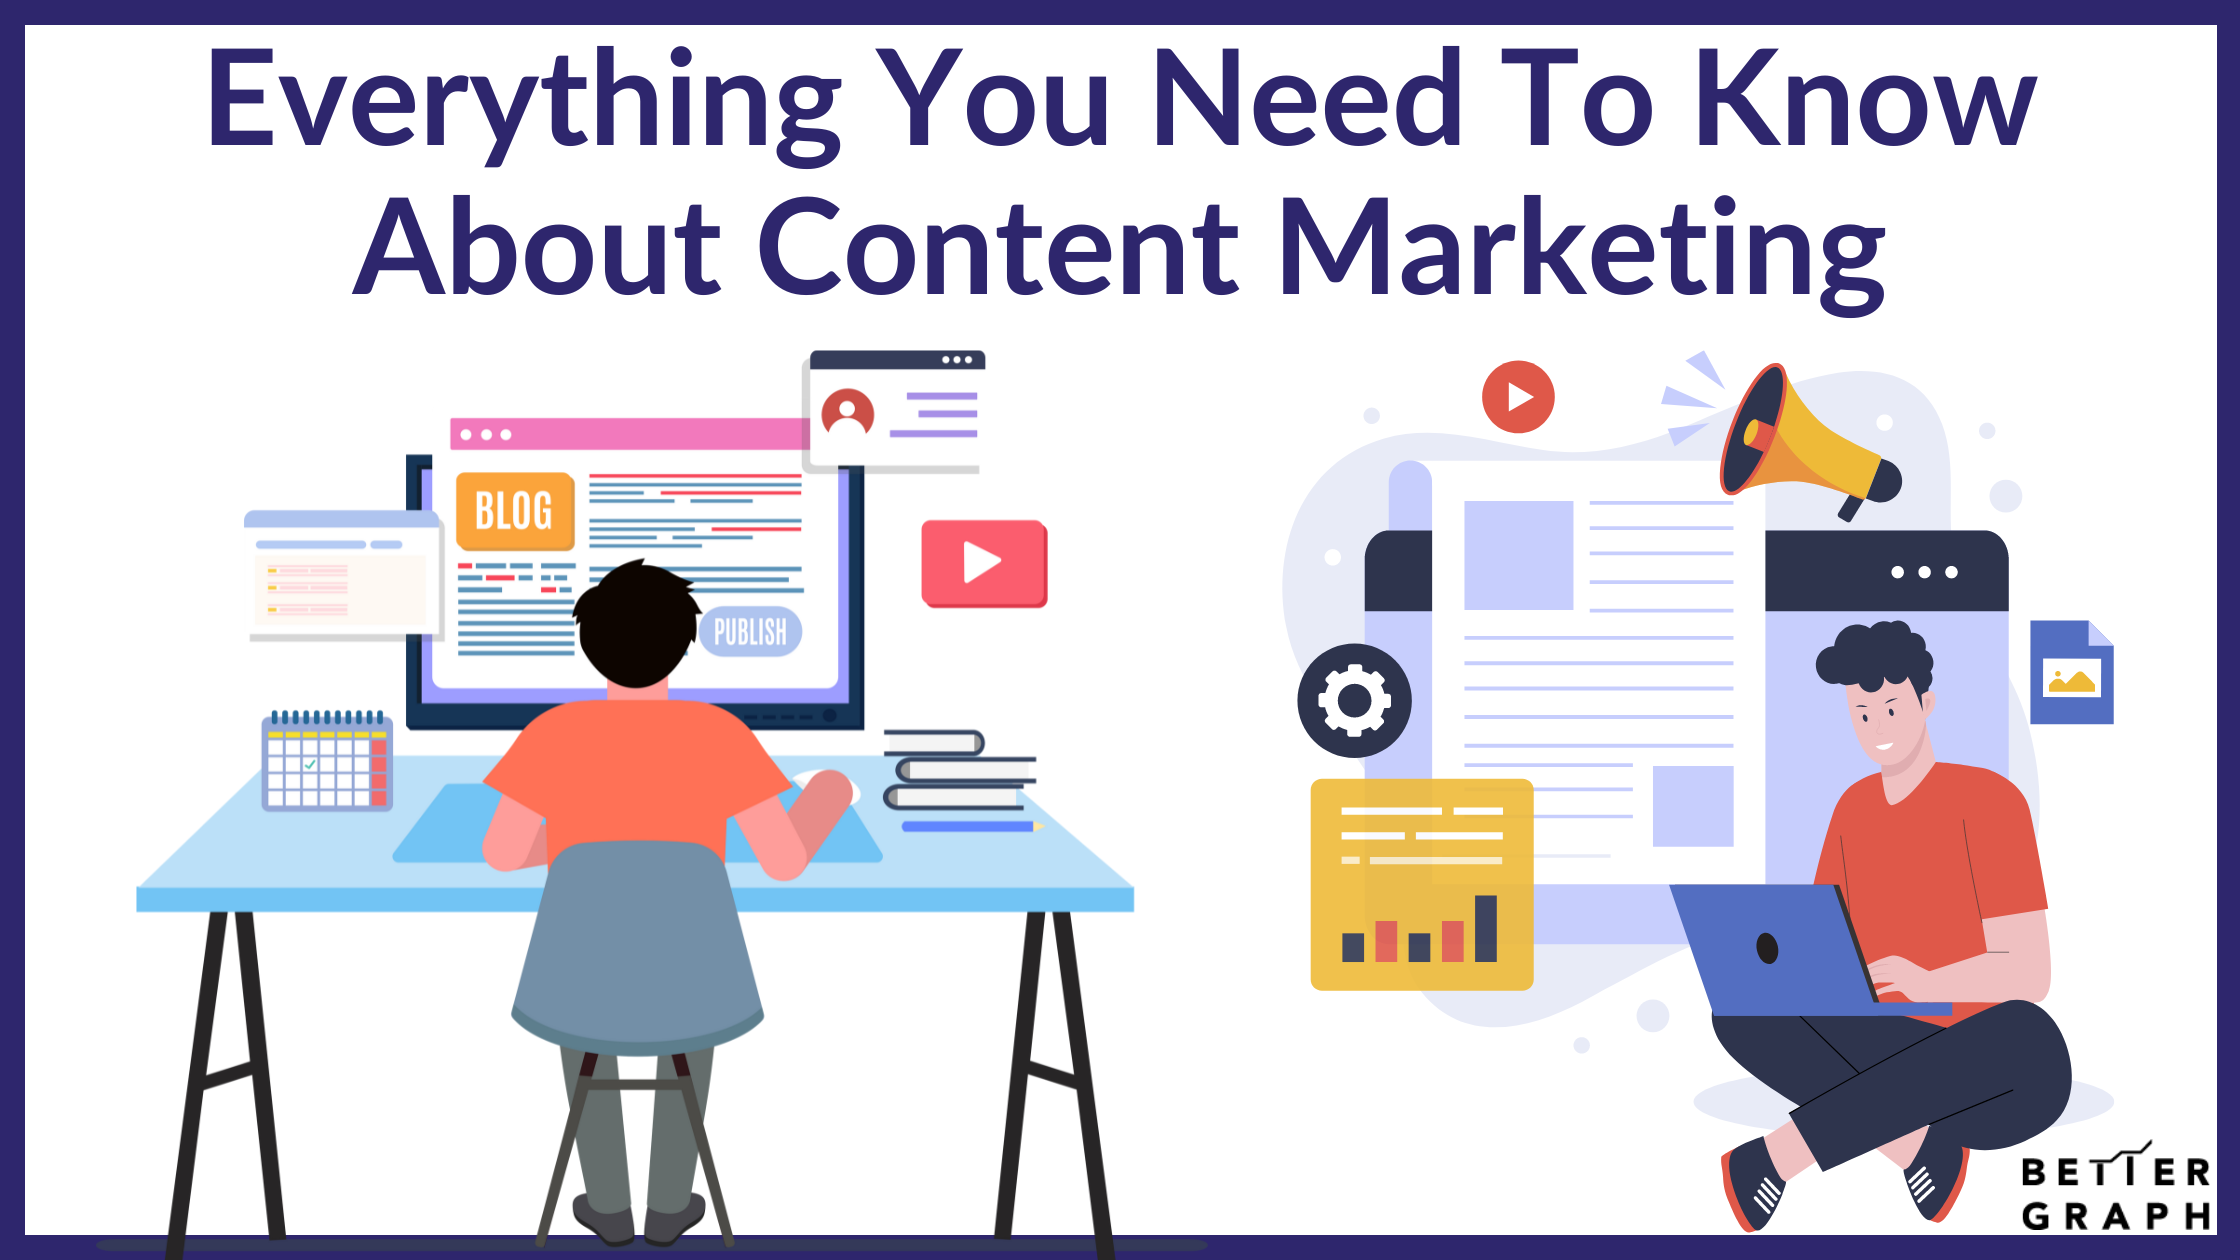 Everything You Need To Know About Content Marketing (1).png  by BetterGraph